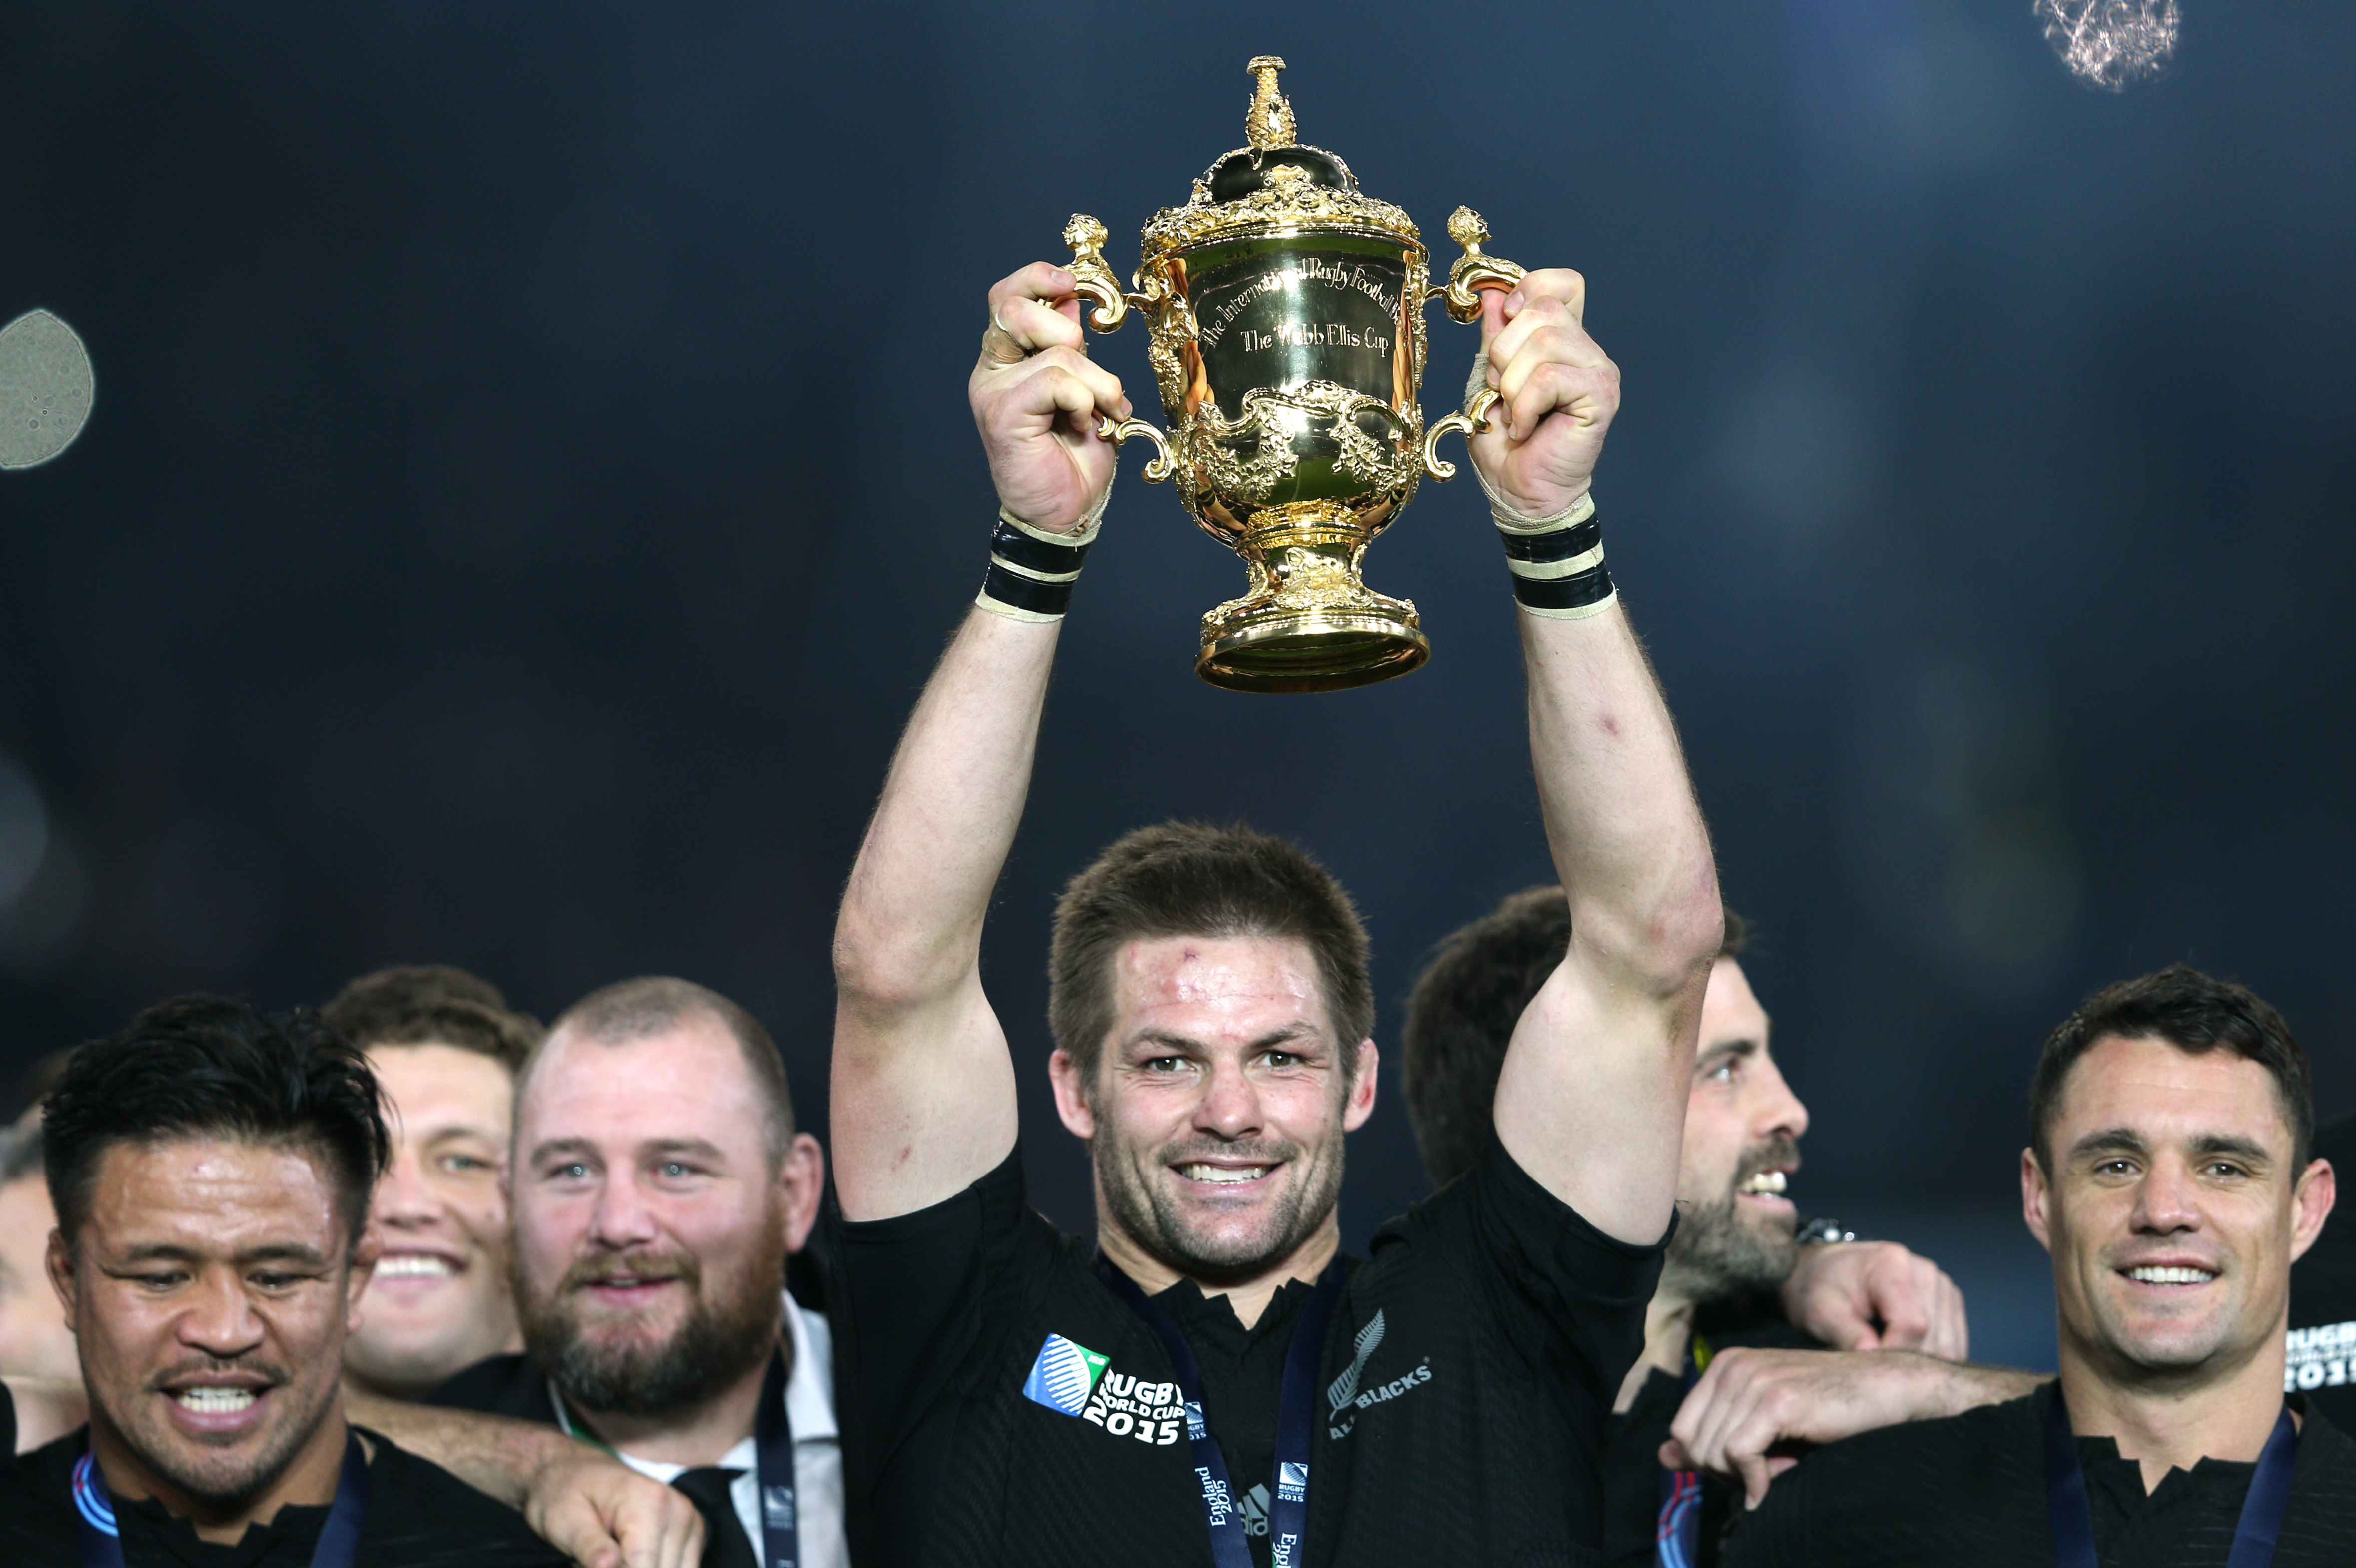 Richie McCaw lifts the Webb Ellis Cup after New Zealand's 2015 World Cup win